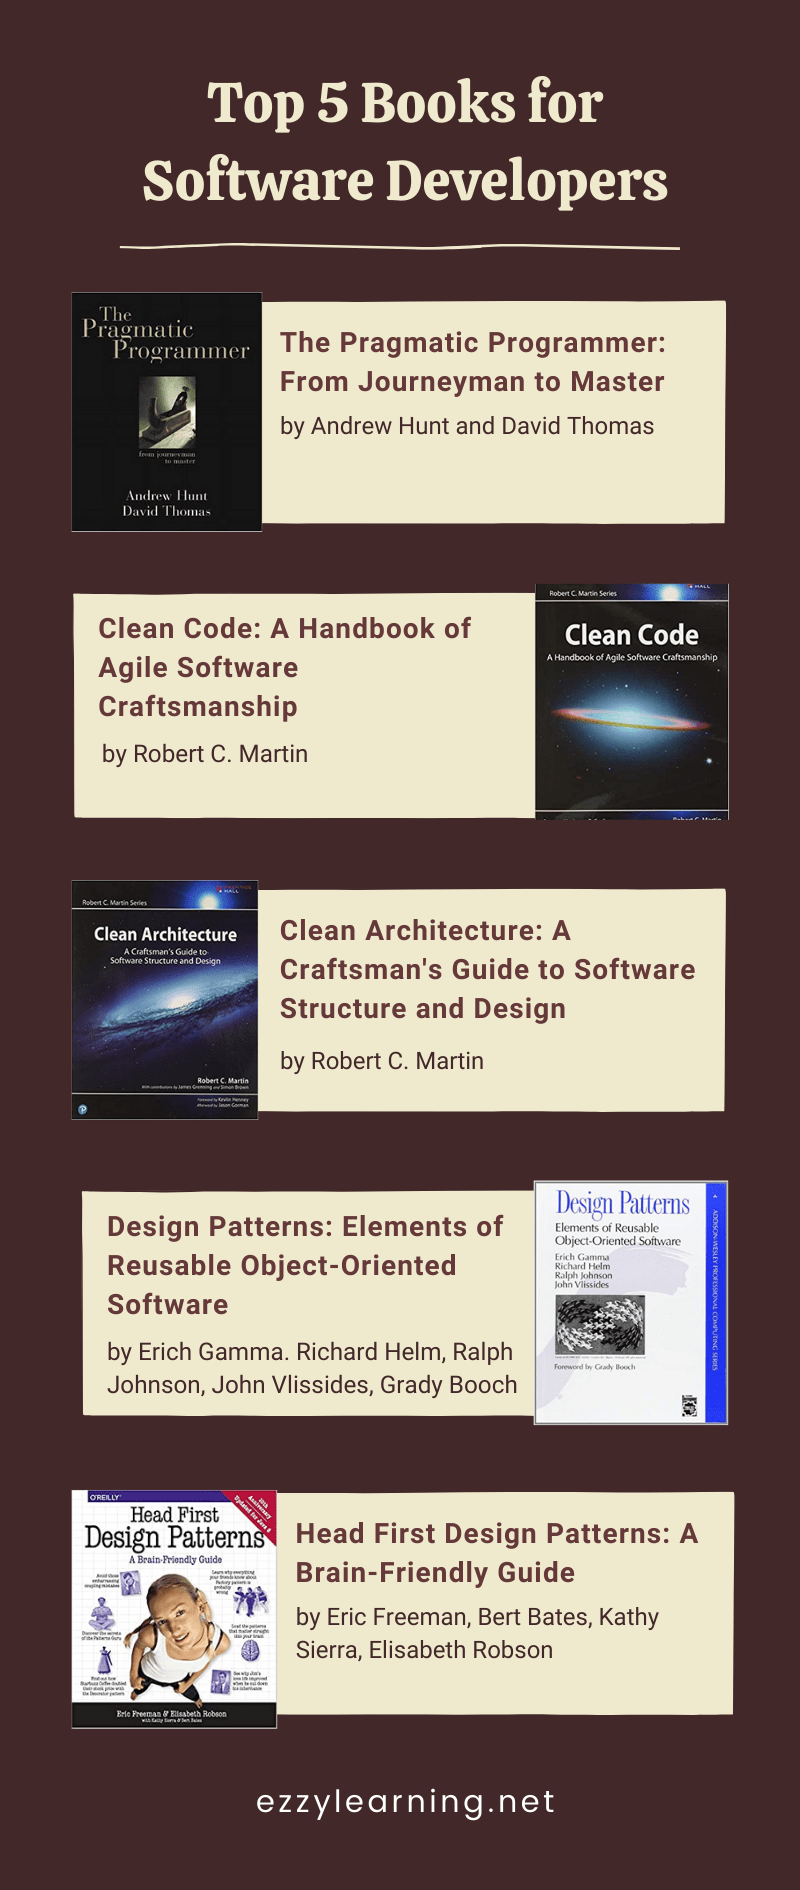 Top 5 Books for Software Developers